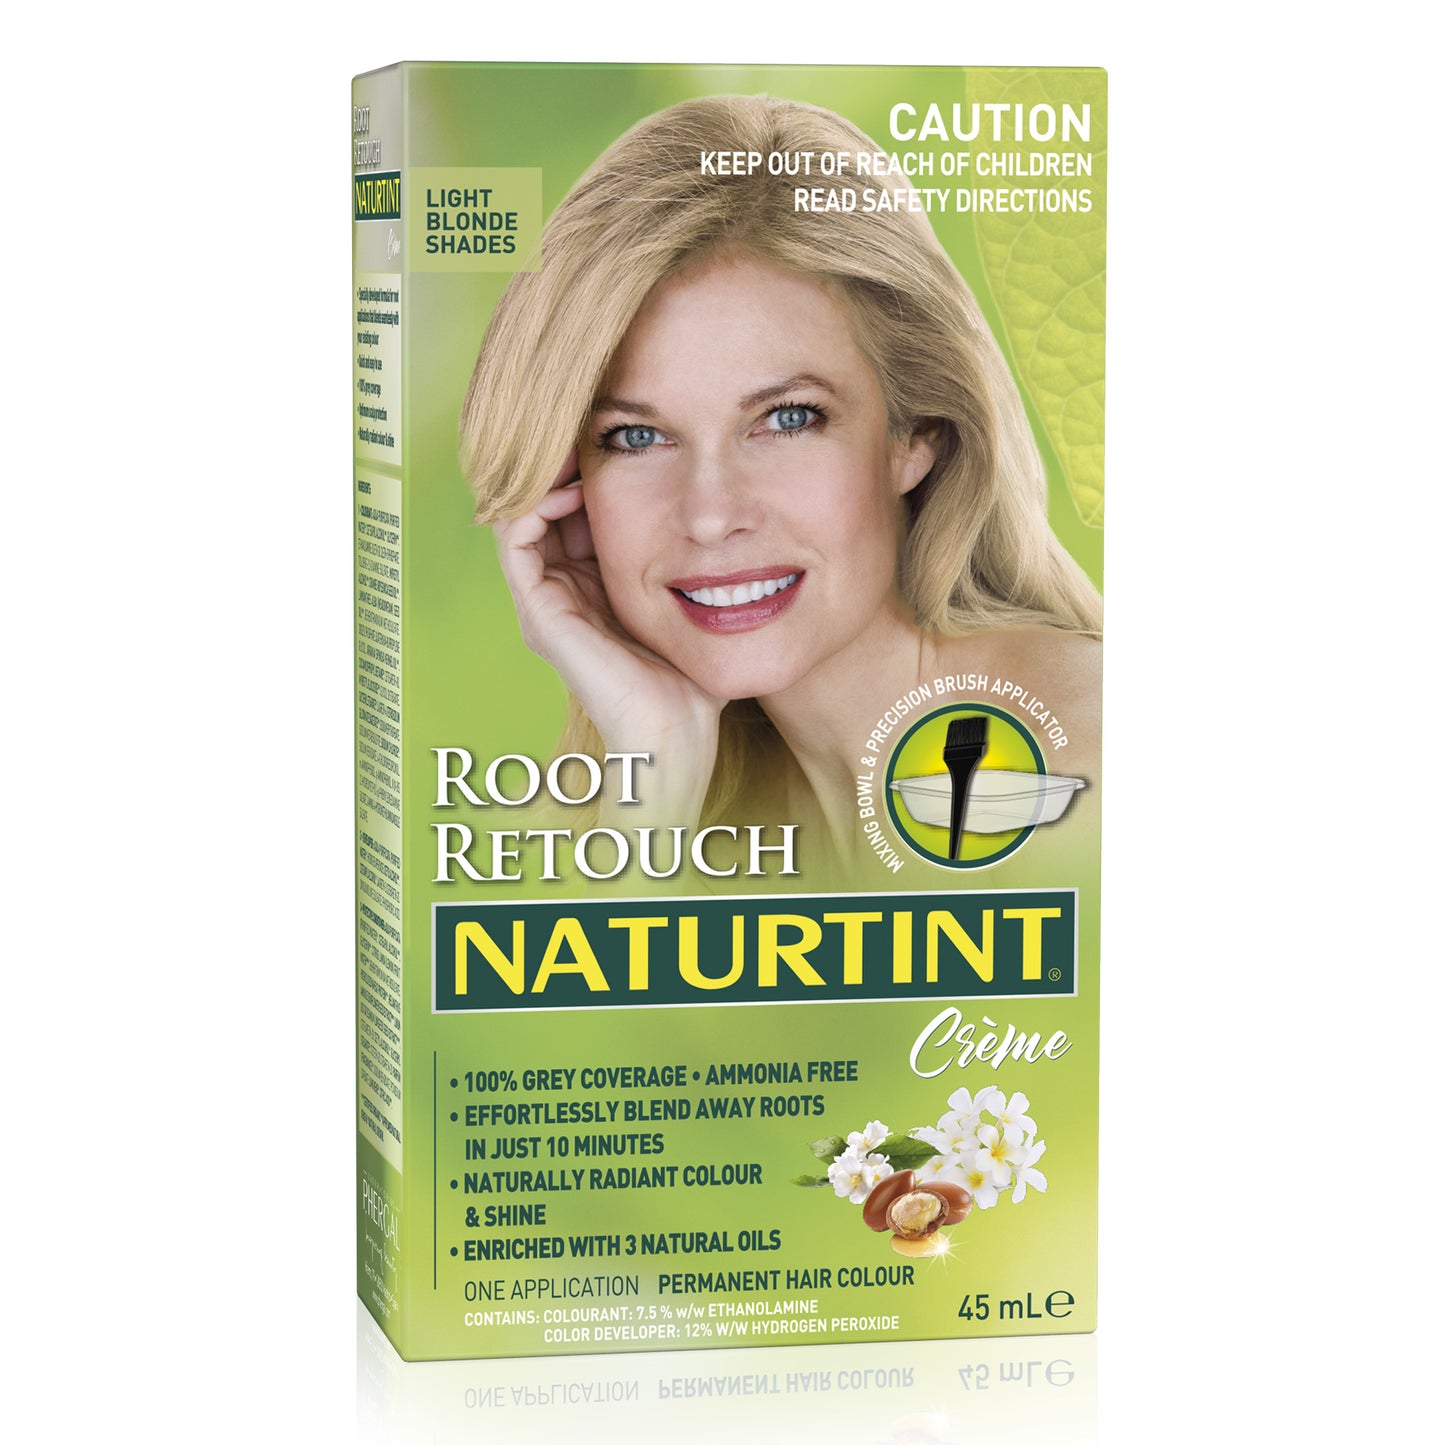 Naturtint Root Retouch Creme, 45ml 100% Grey Coverage